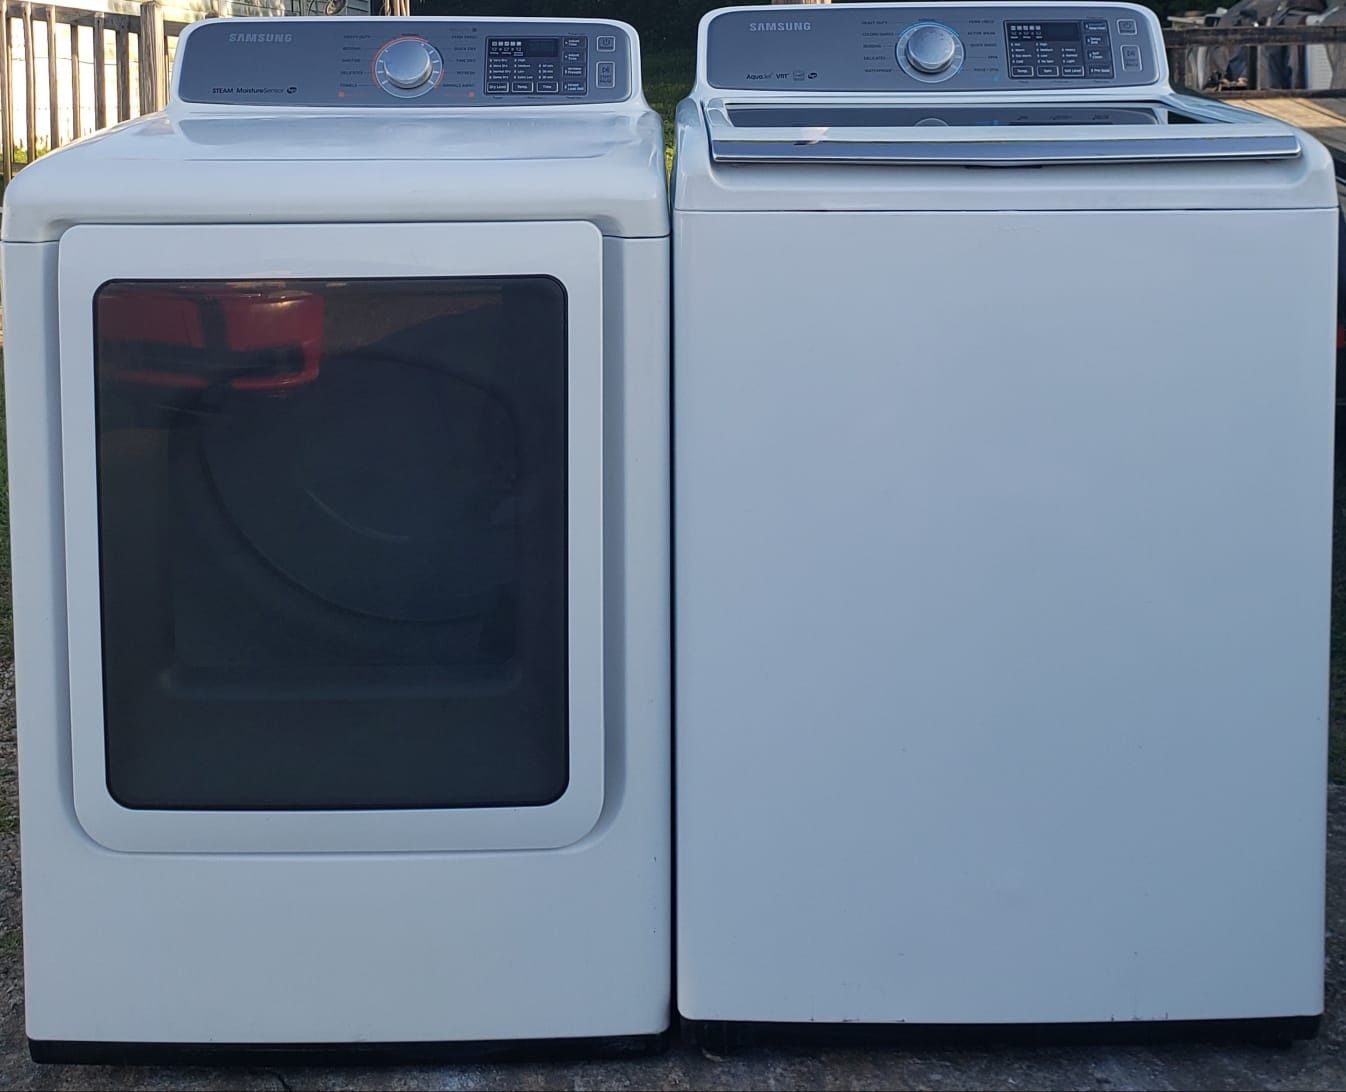 SAMSUNG WASHER AND DRYER SET TOP LOAD